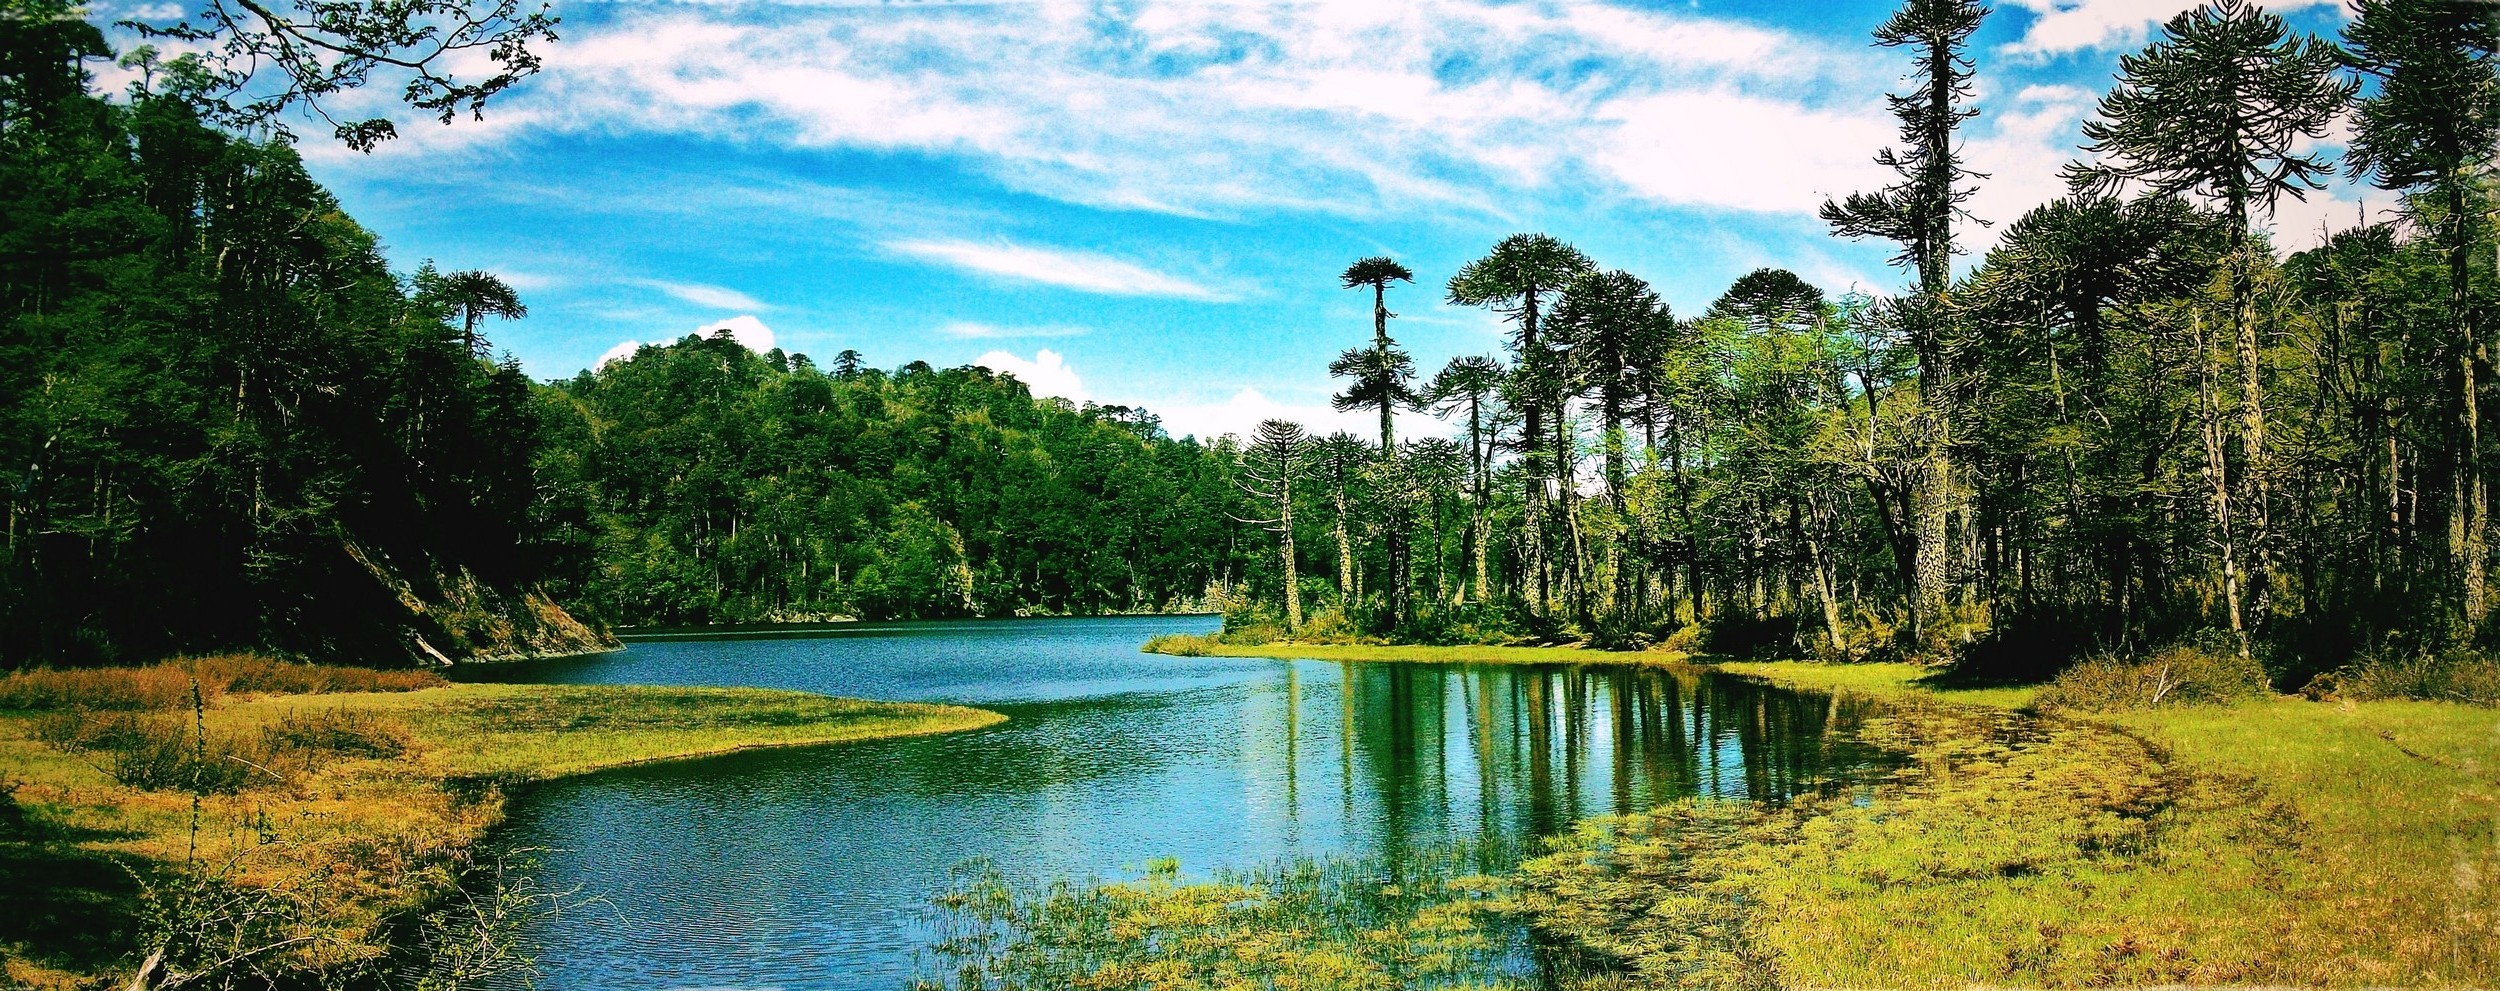 lake, Chile, Forest, Clouds, Grass, Trees, Monkey Puzzle Tree, Reflection, Hill, Nature, Landscape, Water, Green Wallpaper